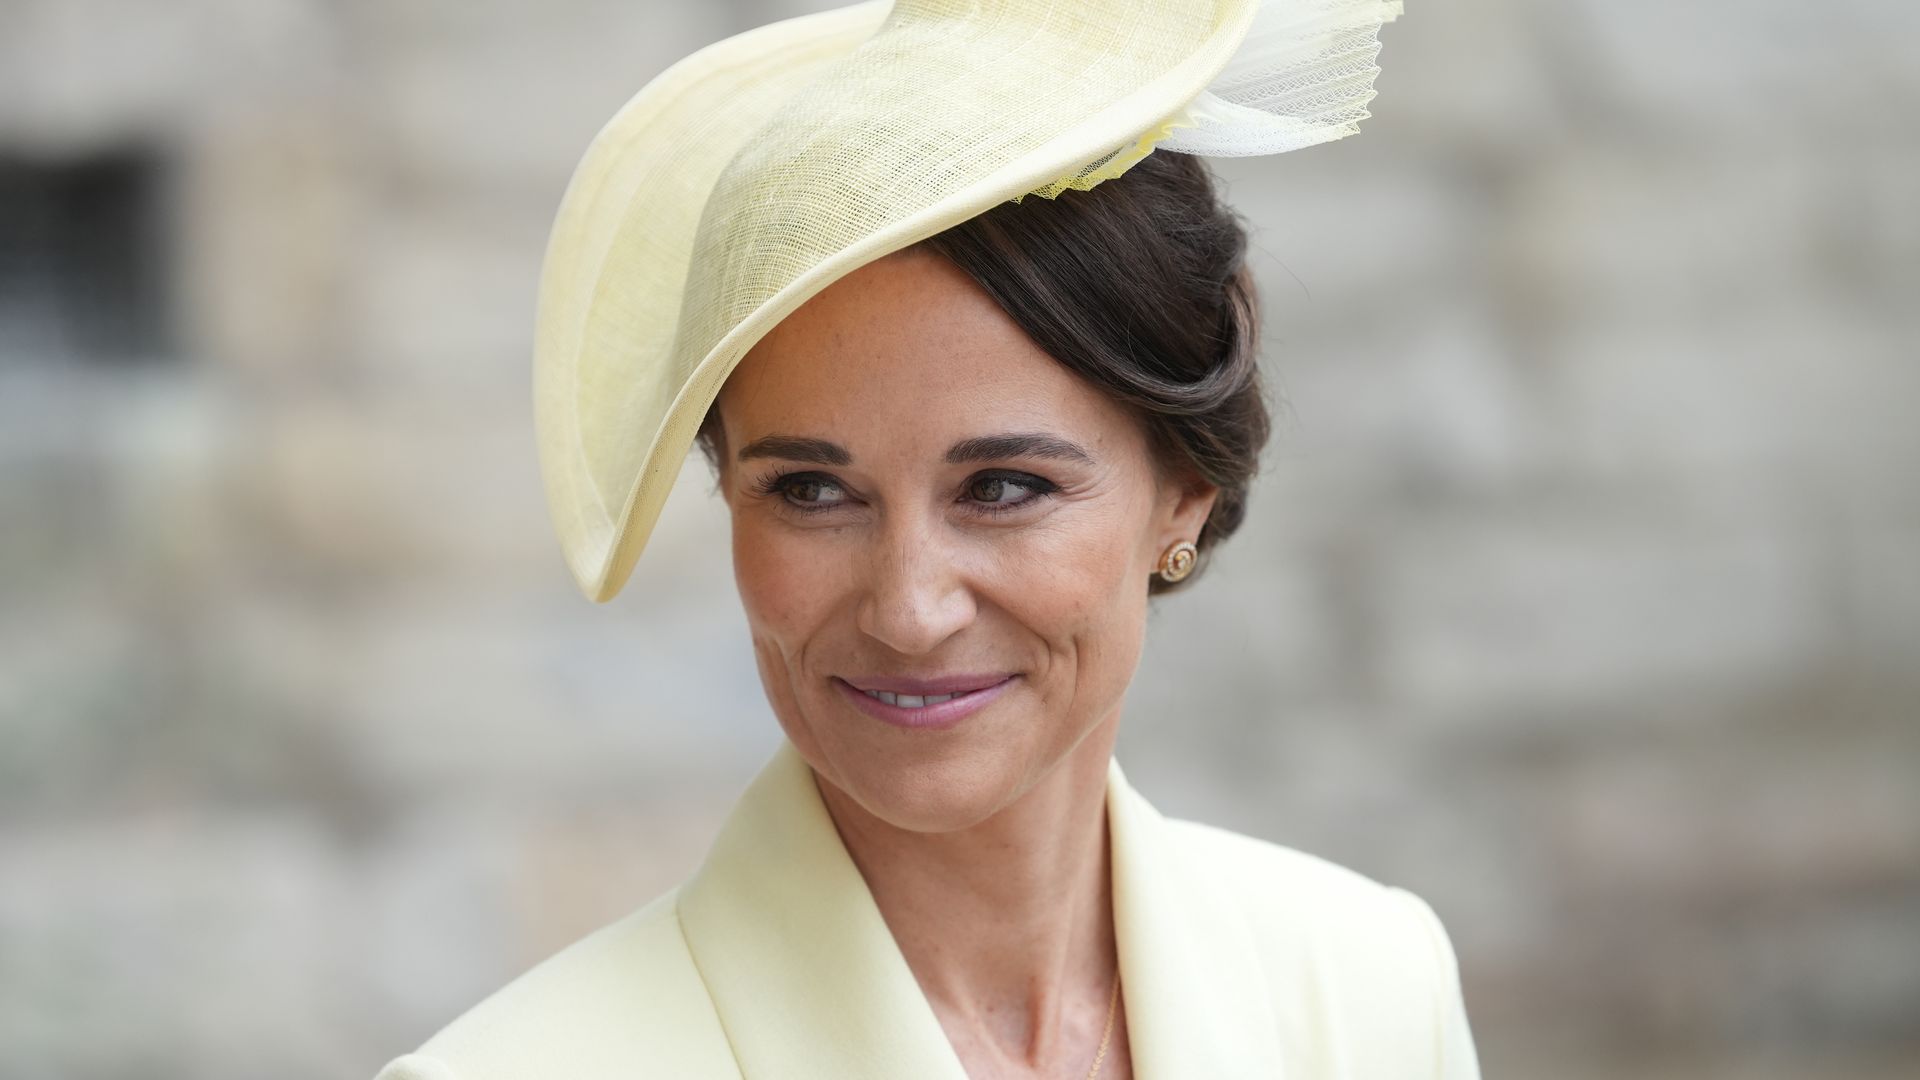 Pippa Middleton leaves after the Coronation of King Charles III and Queen Camilla on May 6, 2023 in London, England. 